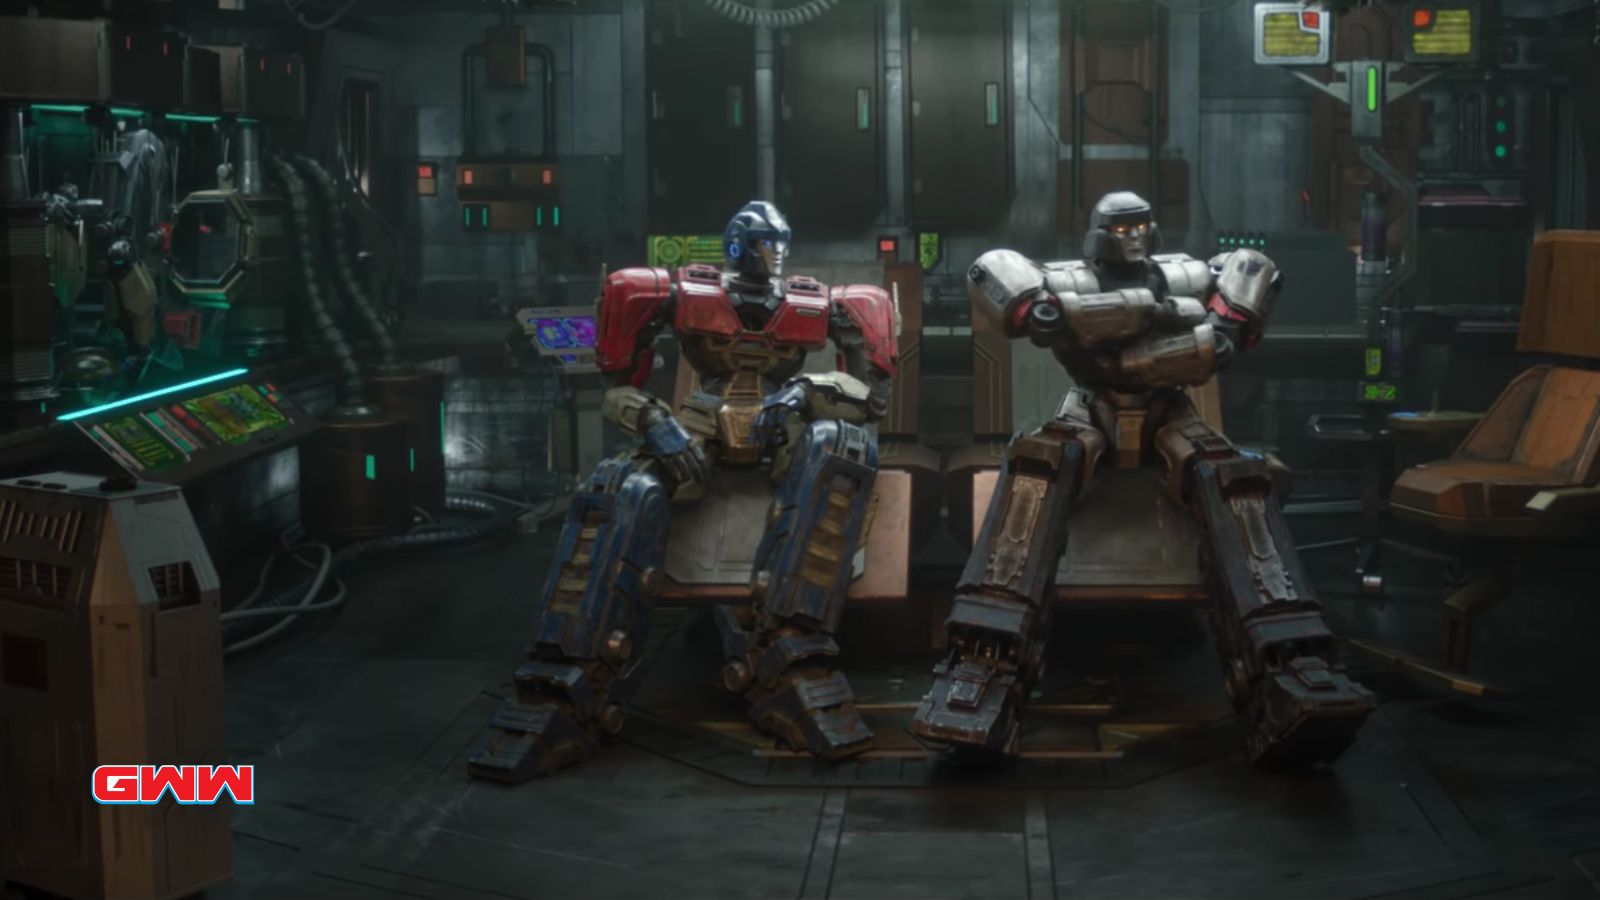 Optimus Prime and Megatron voiced by Chris Hemsworth and Brian Tyree Henry, Transformers One Trailer